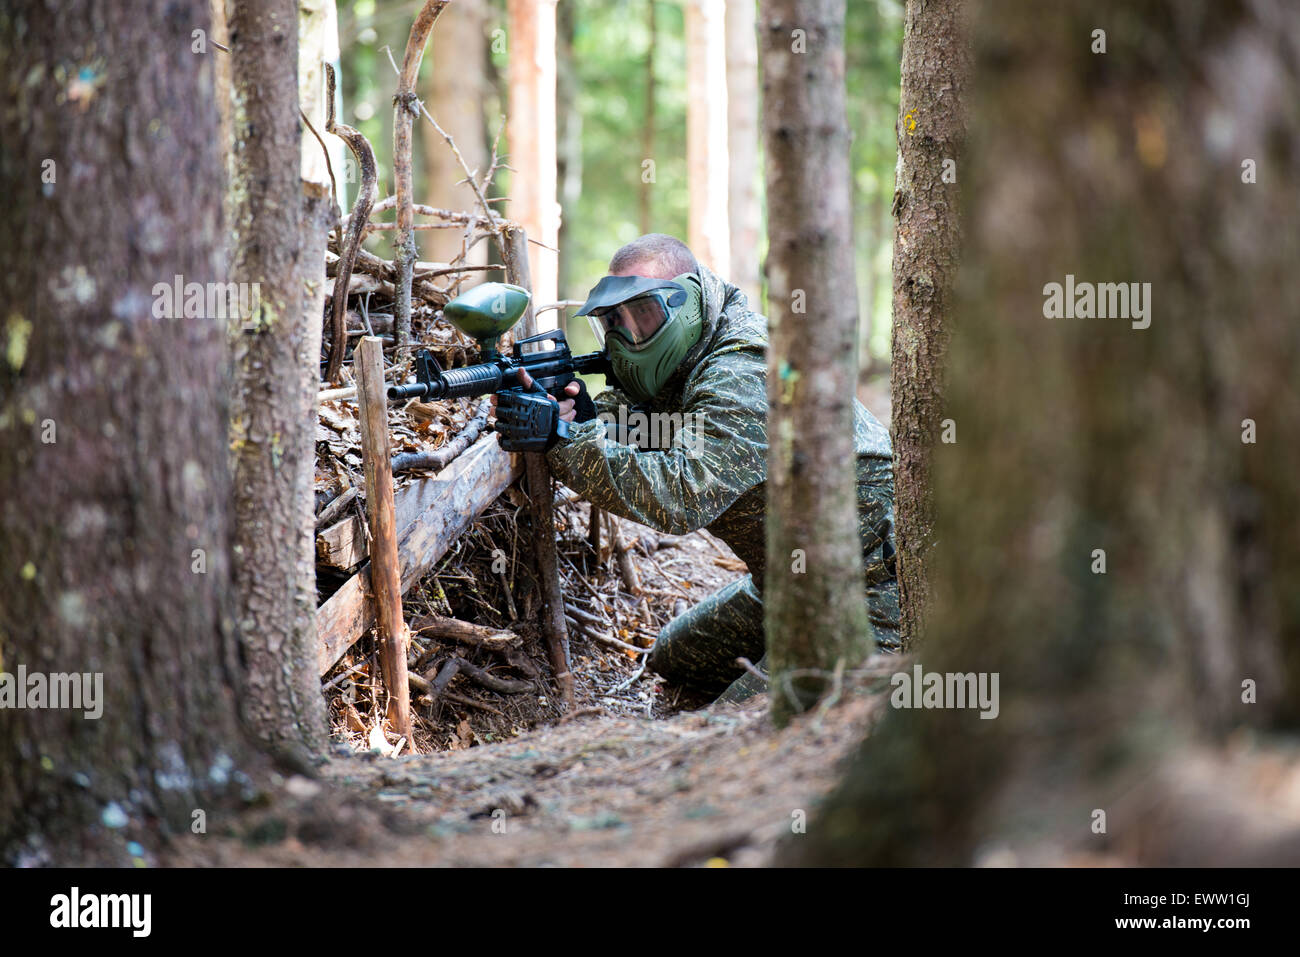 Paintball Sniper Ready For Shooting Stock Photo - Download Image